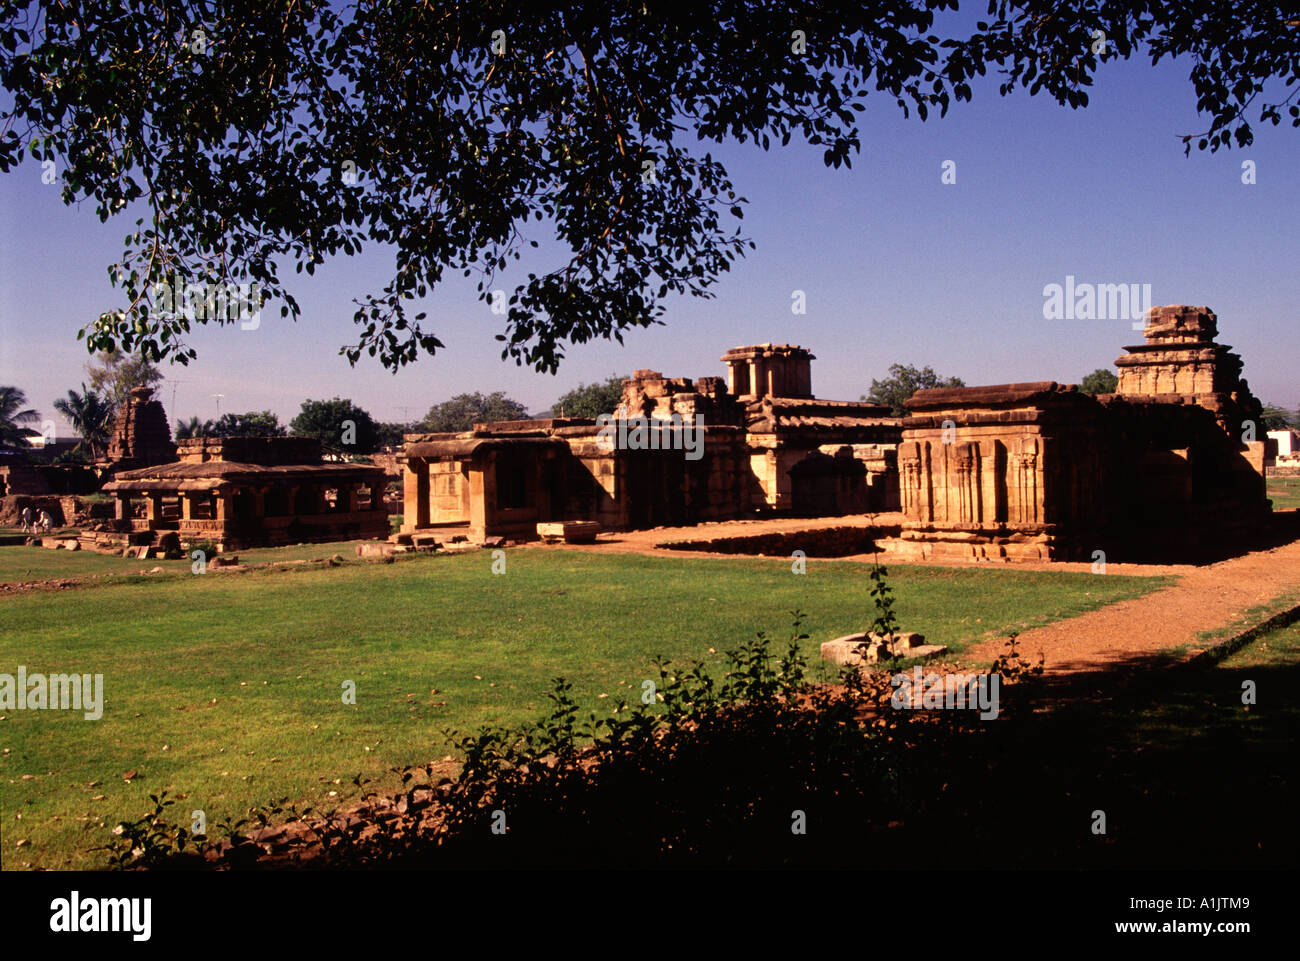 View of the Chalukya architecture style temple complex of 7th and 8th century CE at Pattadakal, also spelled Paṭṭadakallu in Karnataka state India Stock Photo